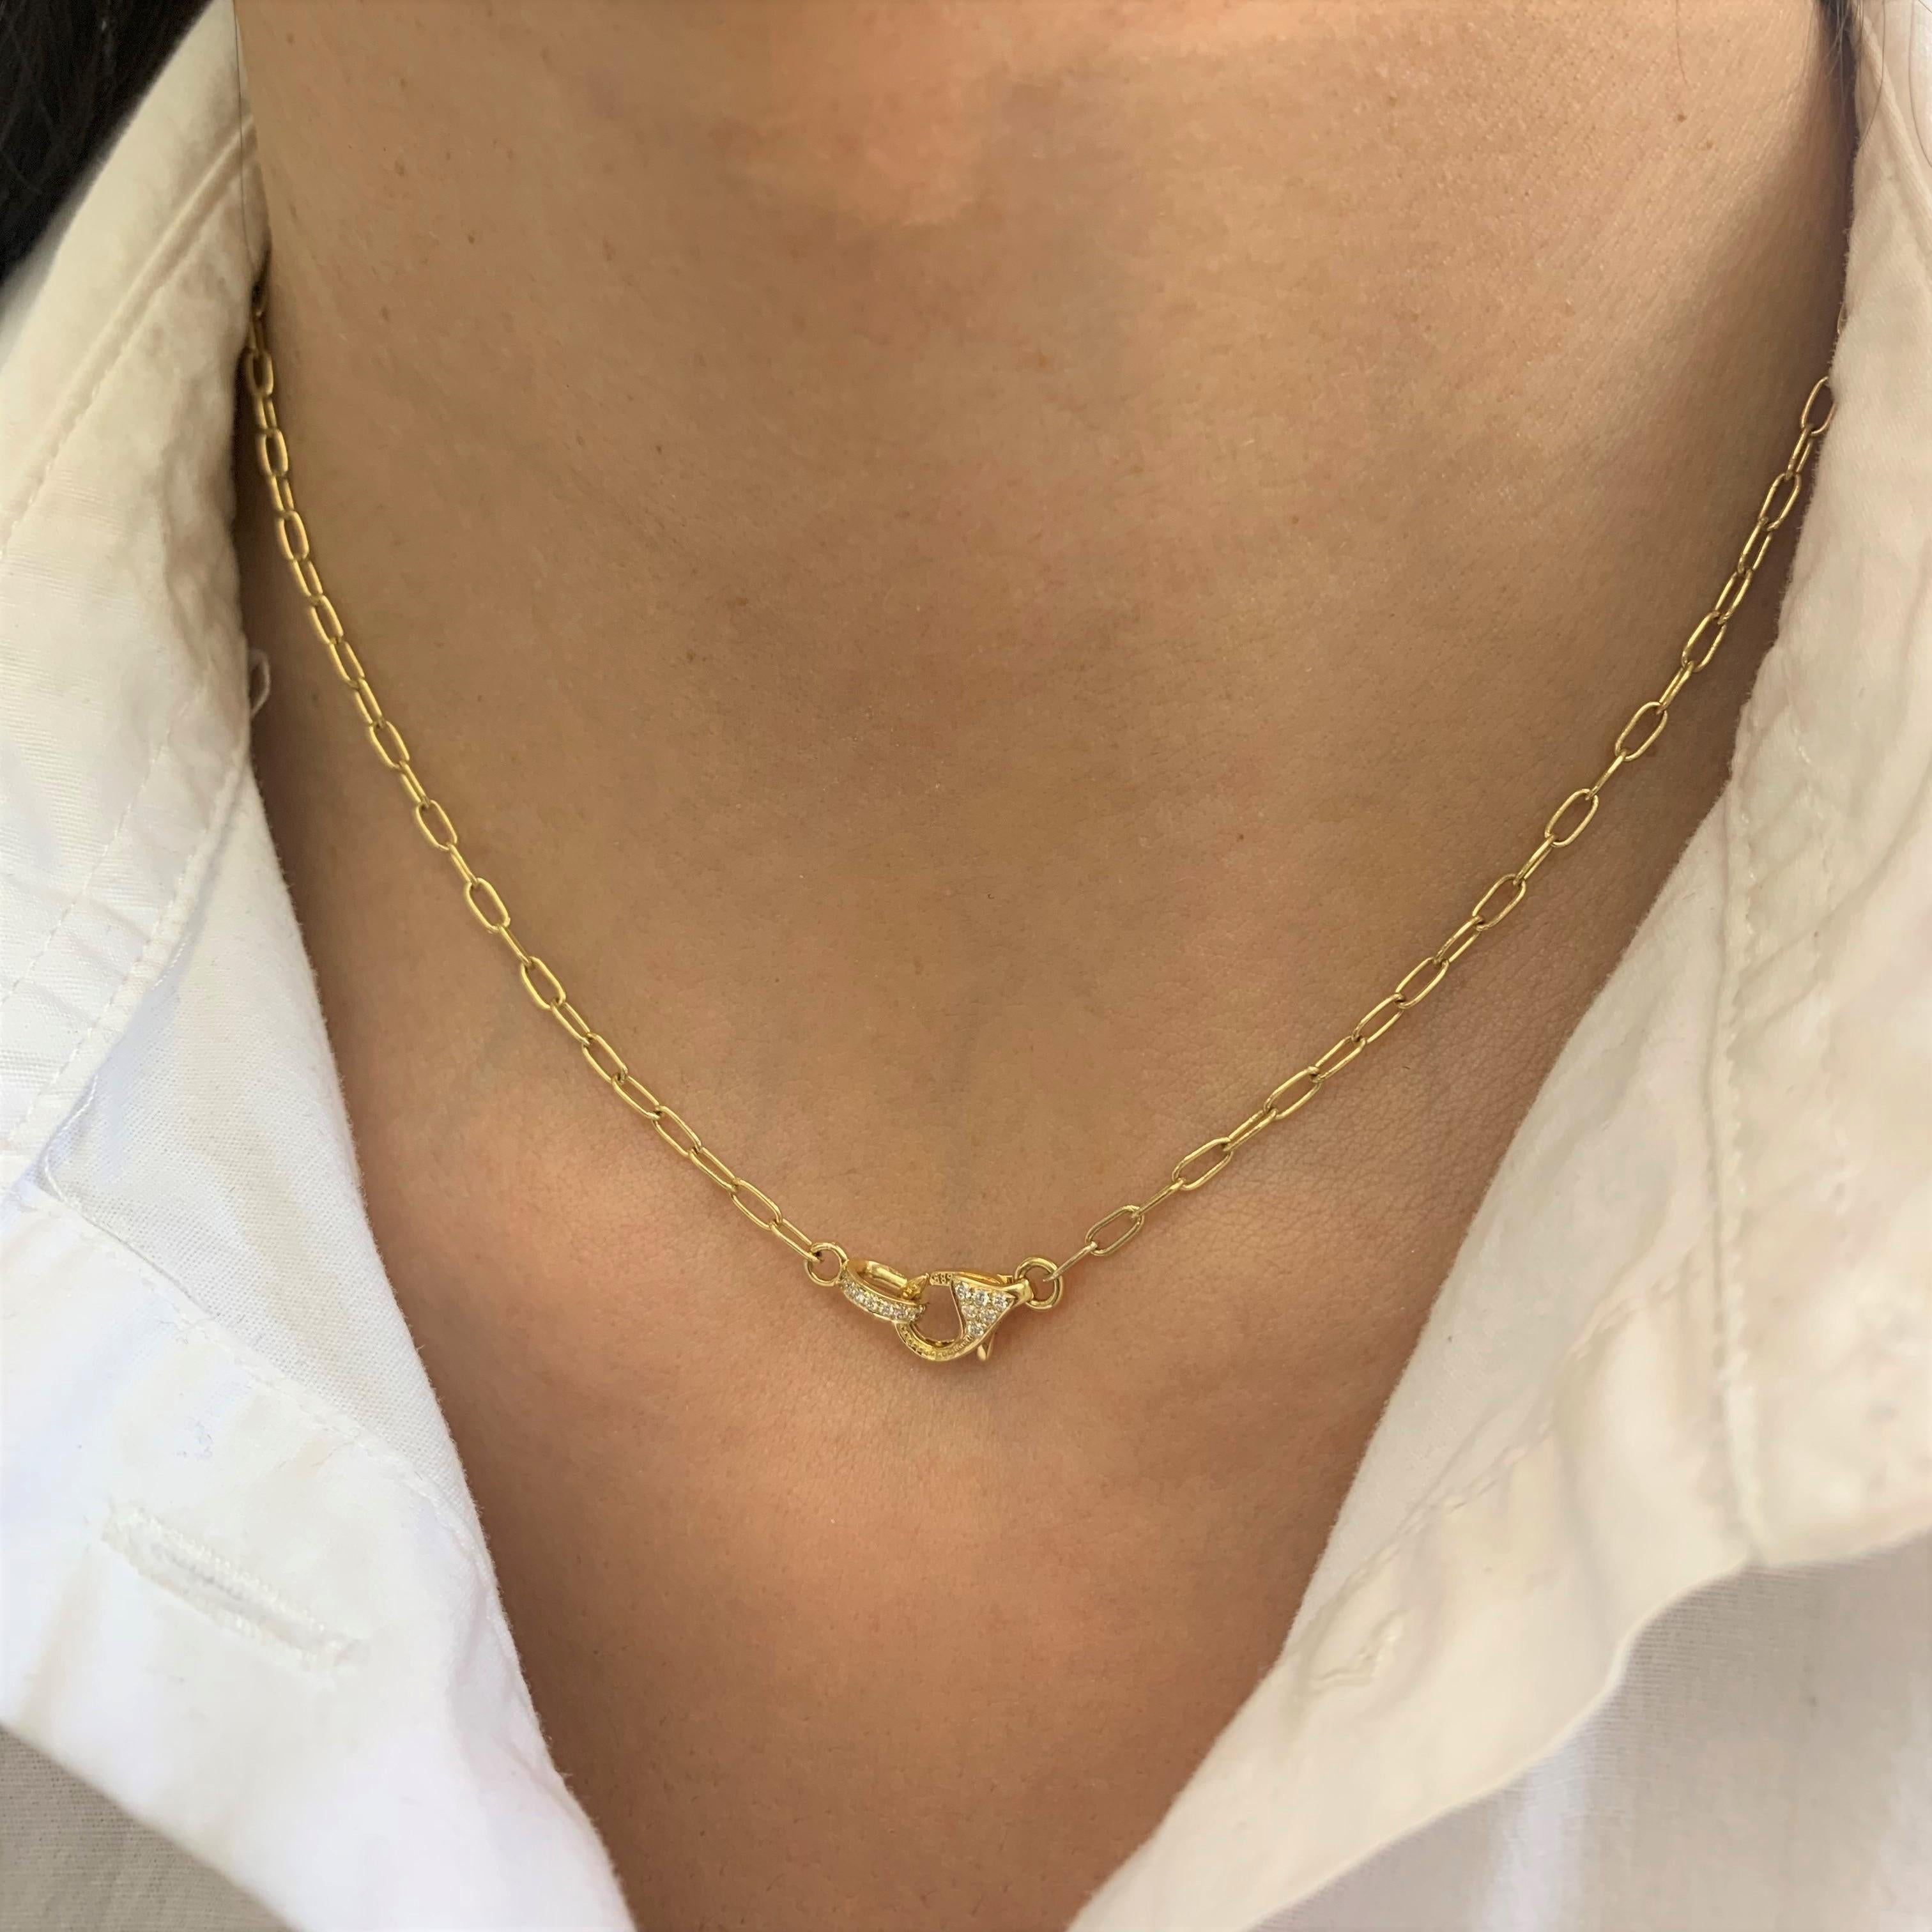 This beautiful Joelle 14k Gold Lobester Link Necklace features 0.13 ct of round natural Diamonds.     
-14K Gold
-0.13cts Natural White Diamonds
-Diamond Color GH
-Clarity SI1
-Lobster Link Necklace
-Gift Box Included